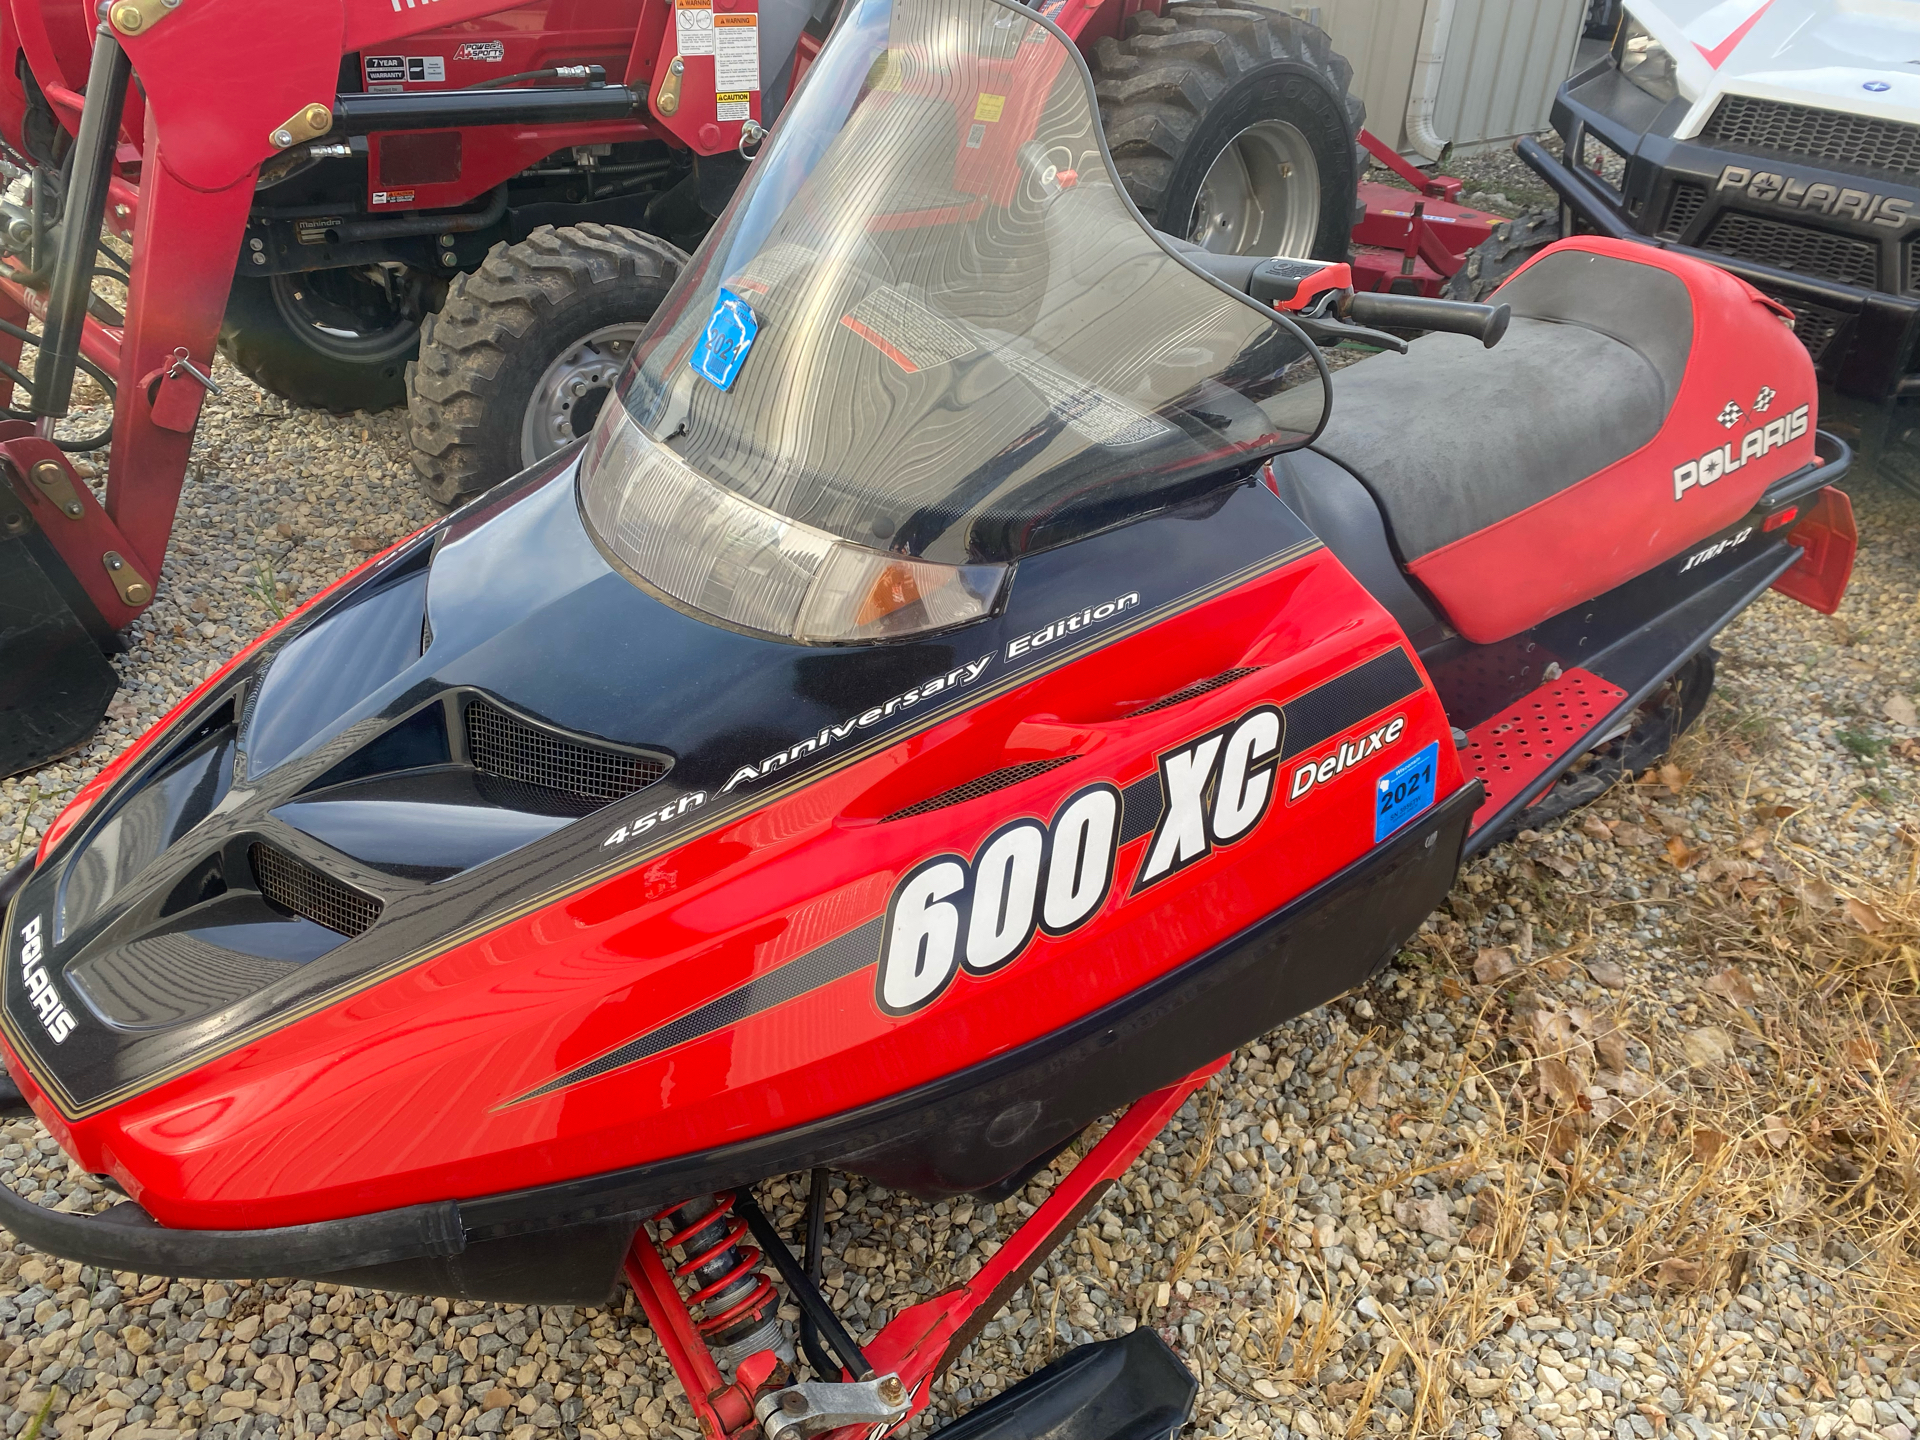 2000 Polaris Indy 600 XC Deluxe 45th Anniversary Edition in Elkhorn, Wisconsin - Photo 2